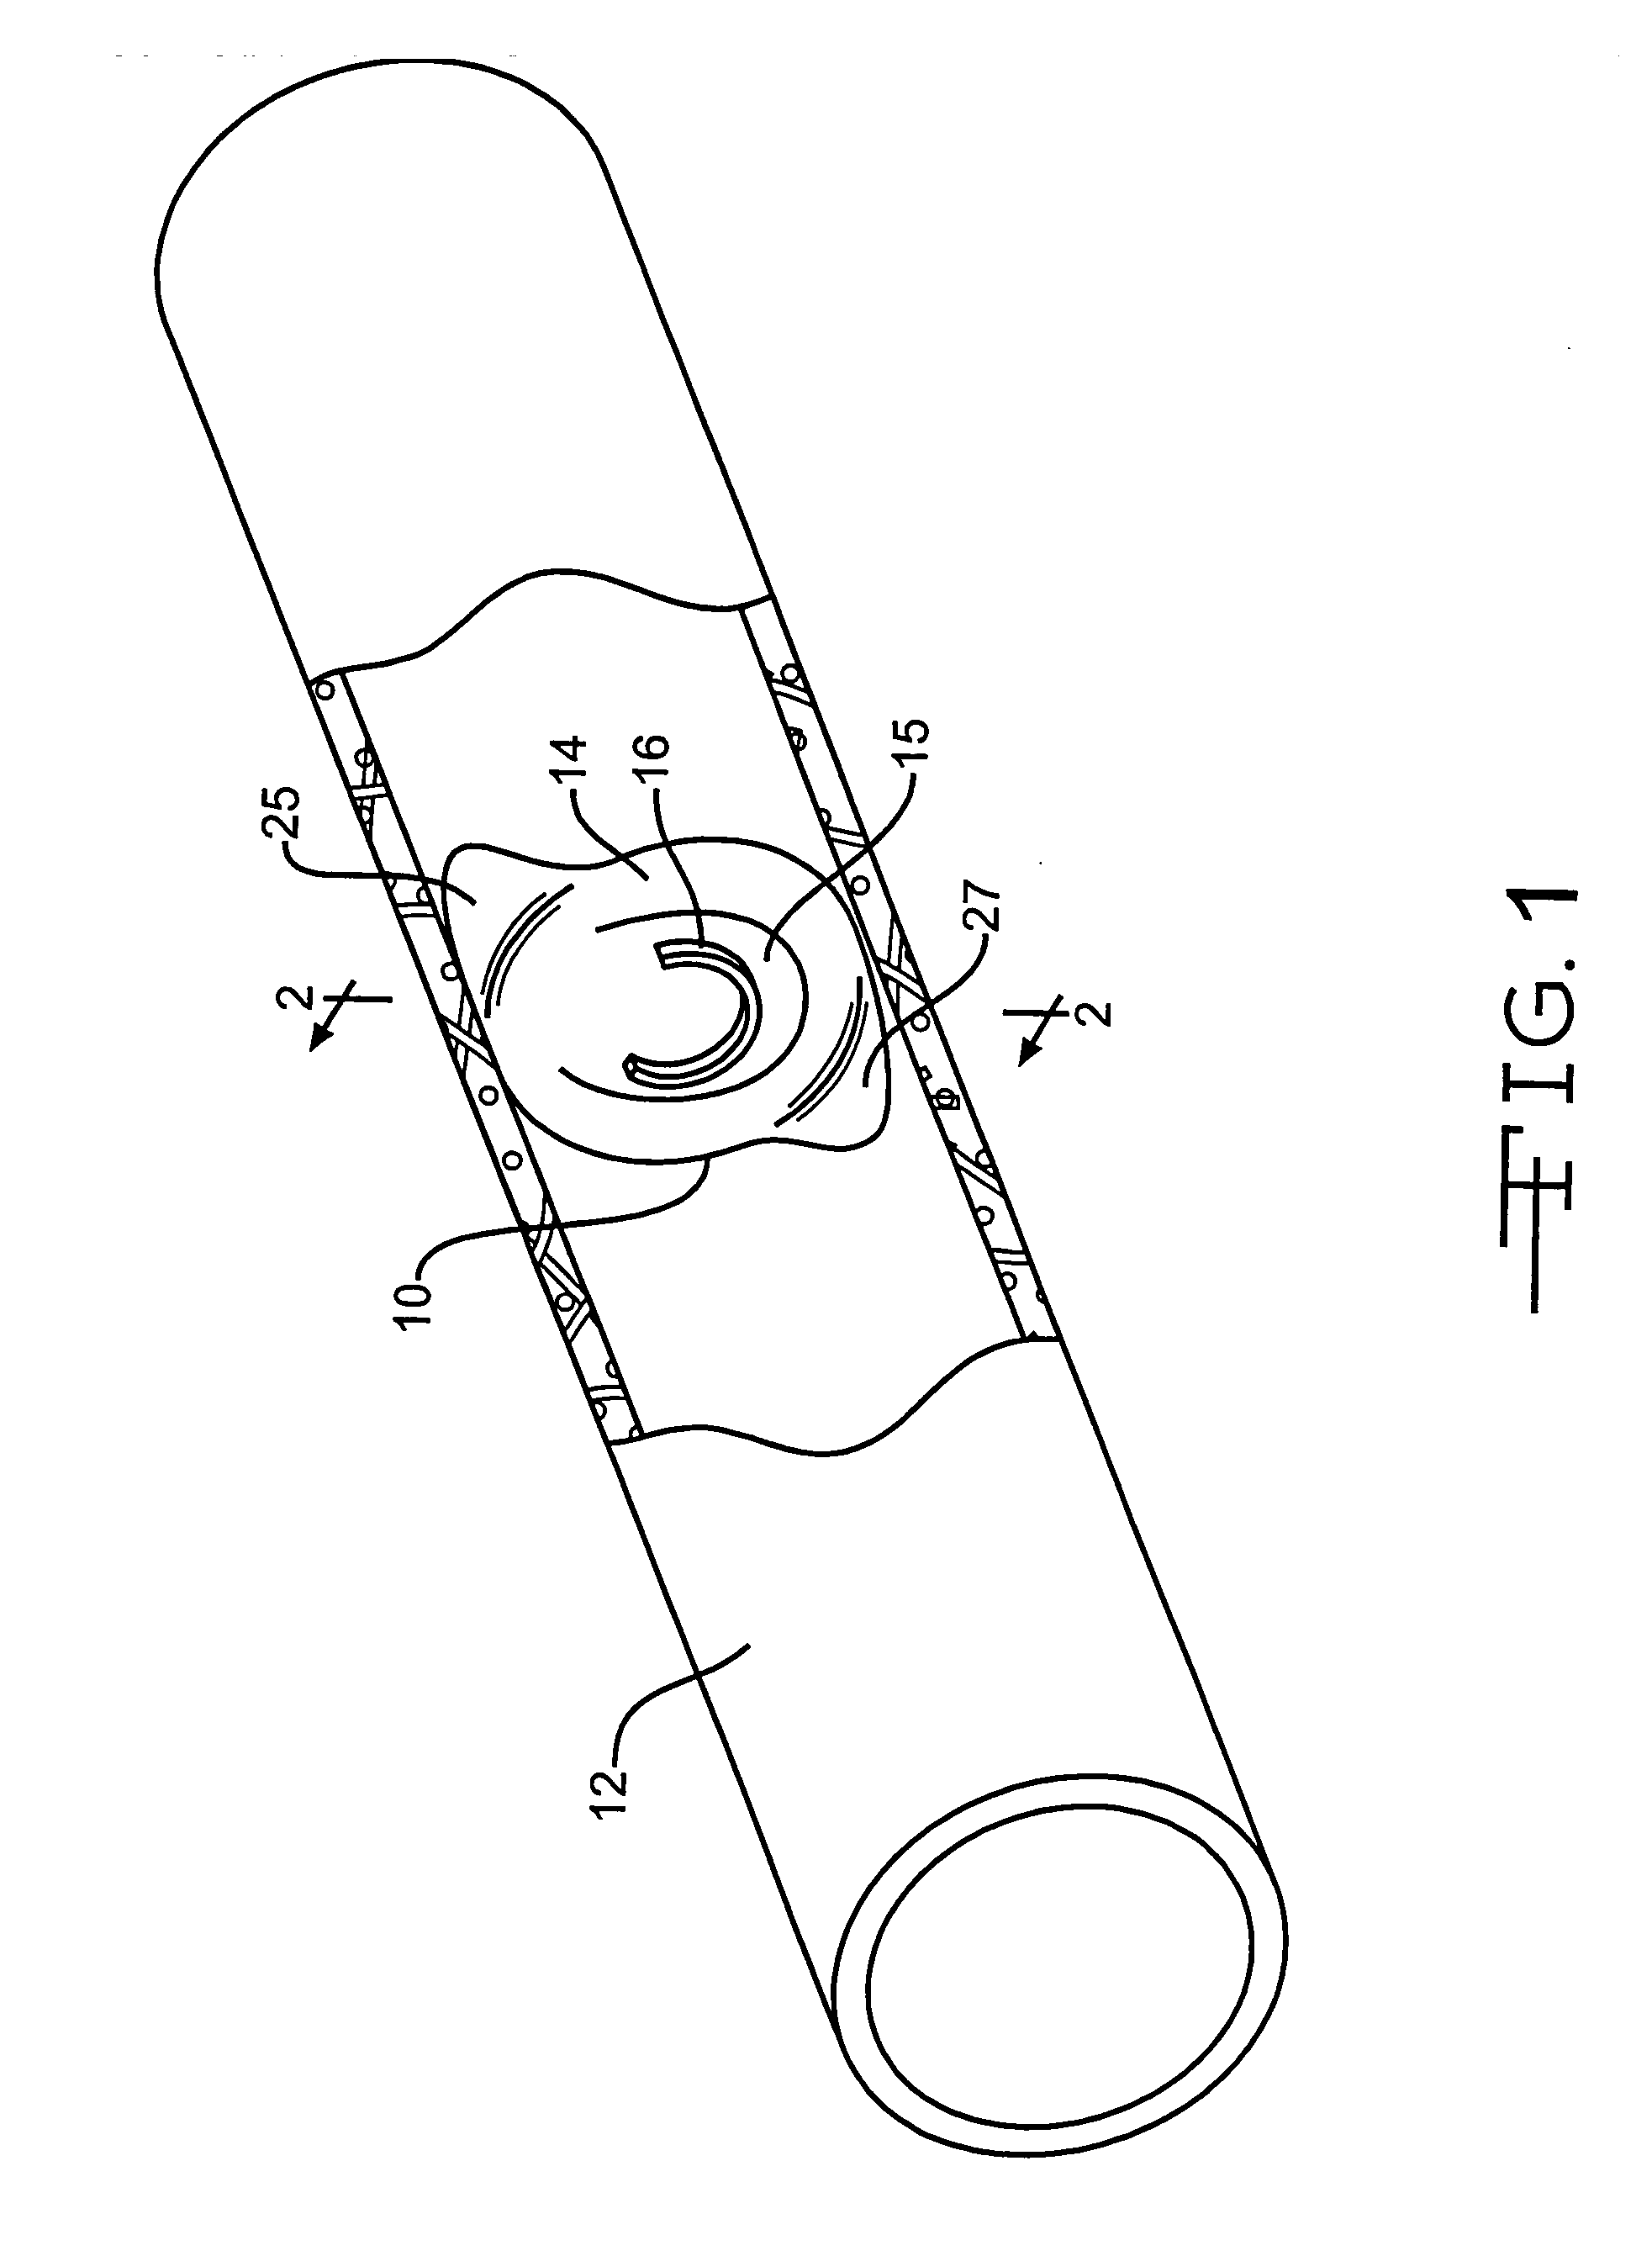 Prosthetic valve with spacing member